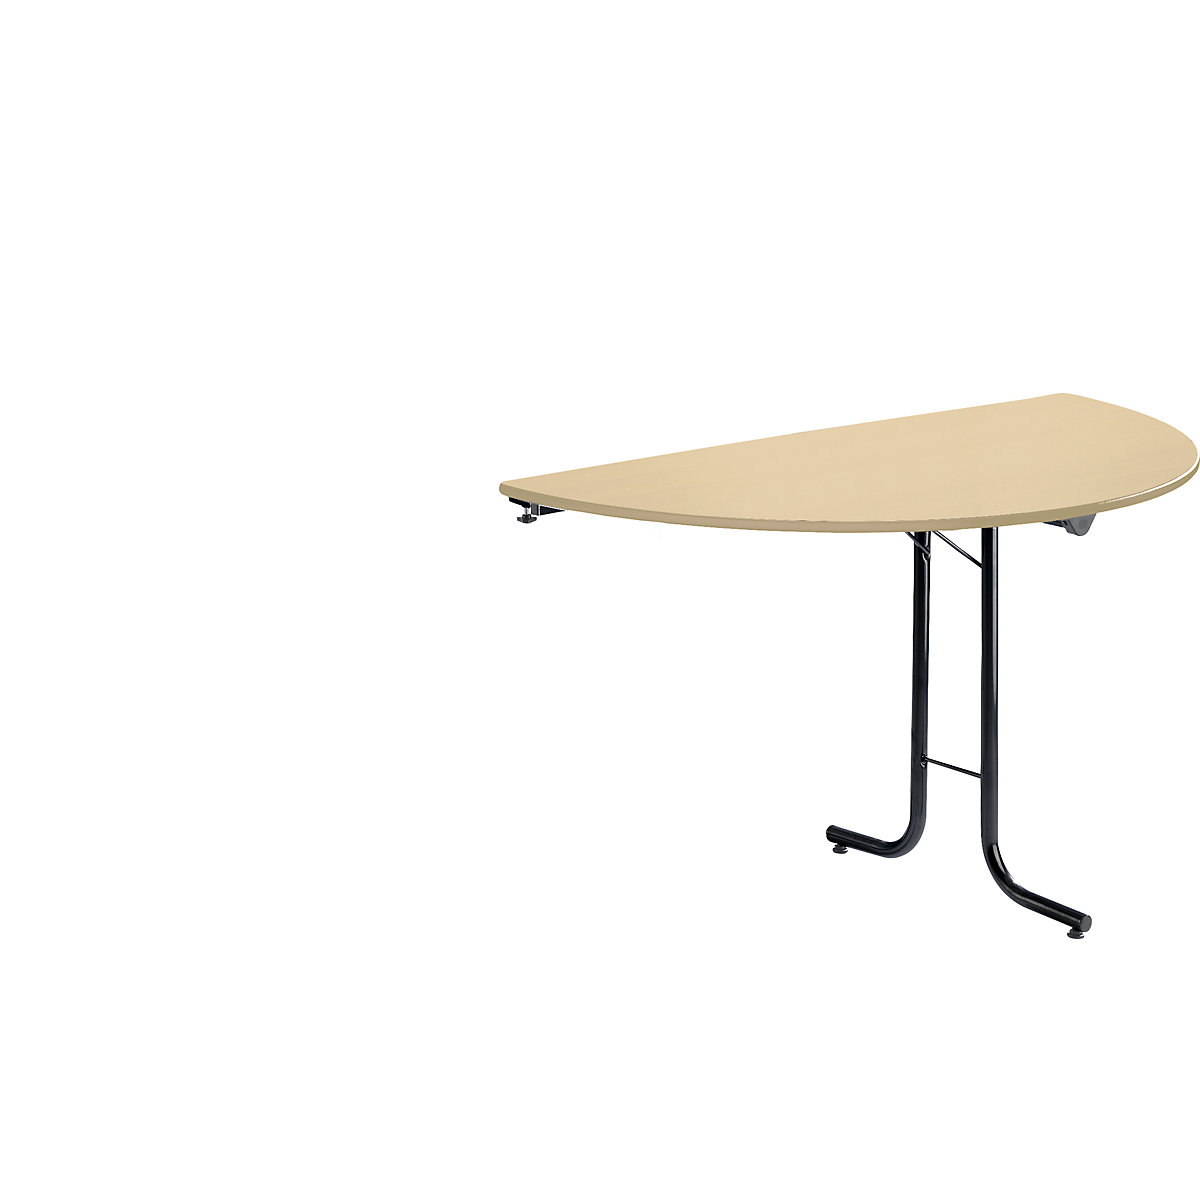 Extension table for folding table, semicircular top, 1400 x 700 mm, black frame, maple finish tabletop-4